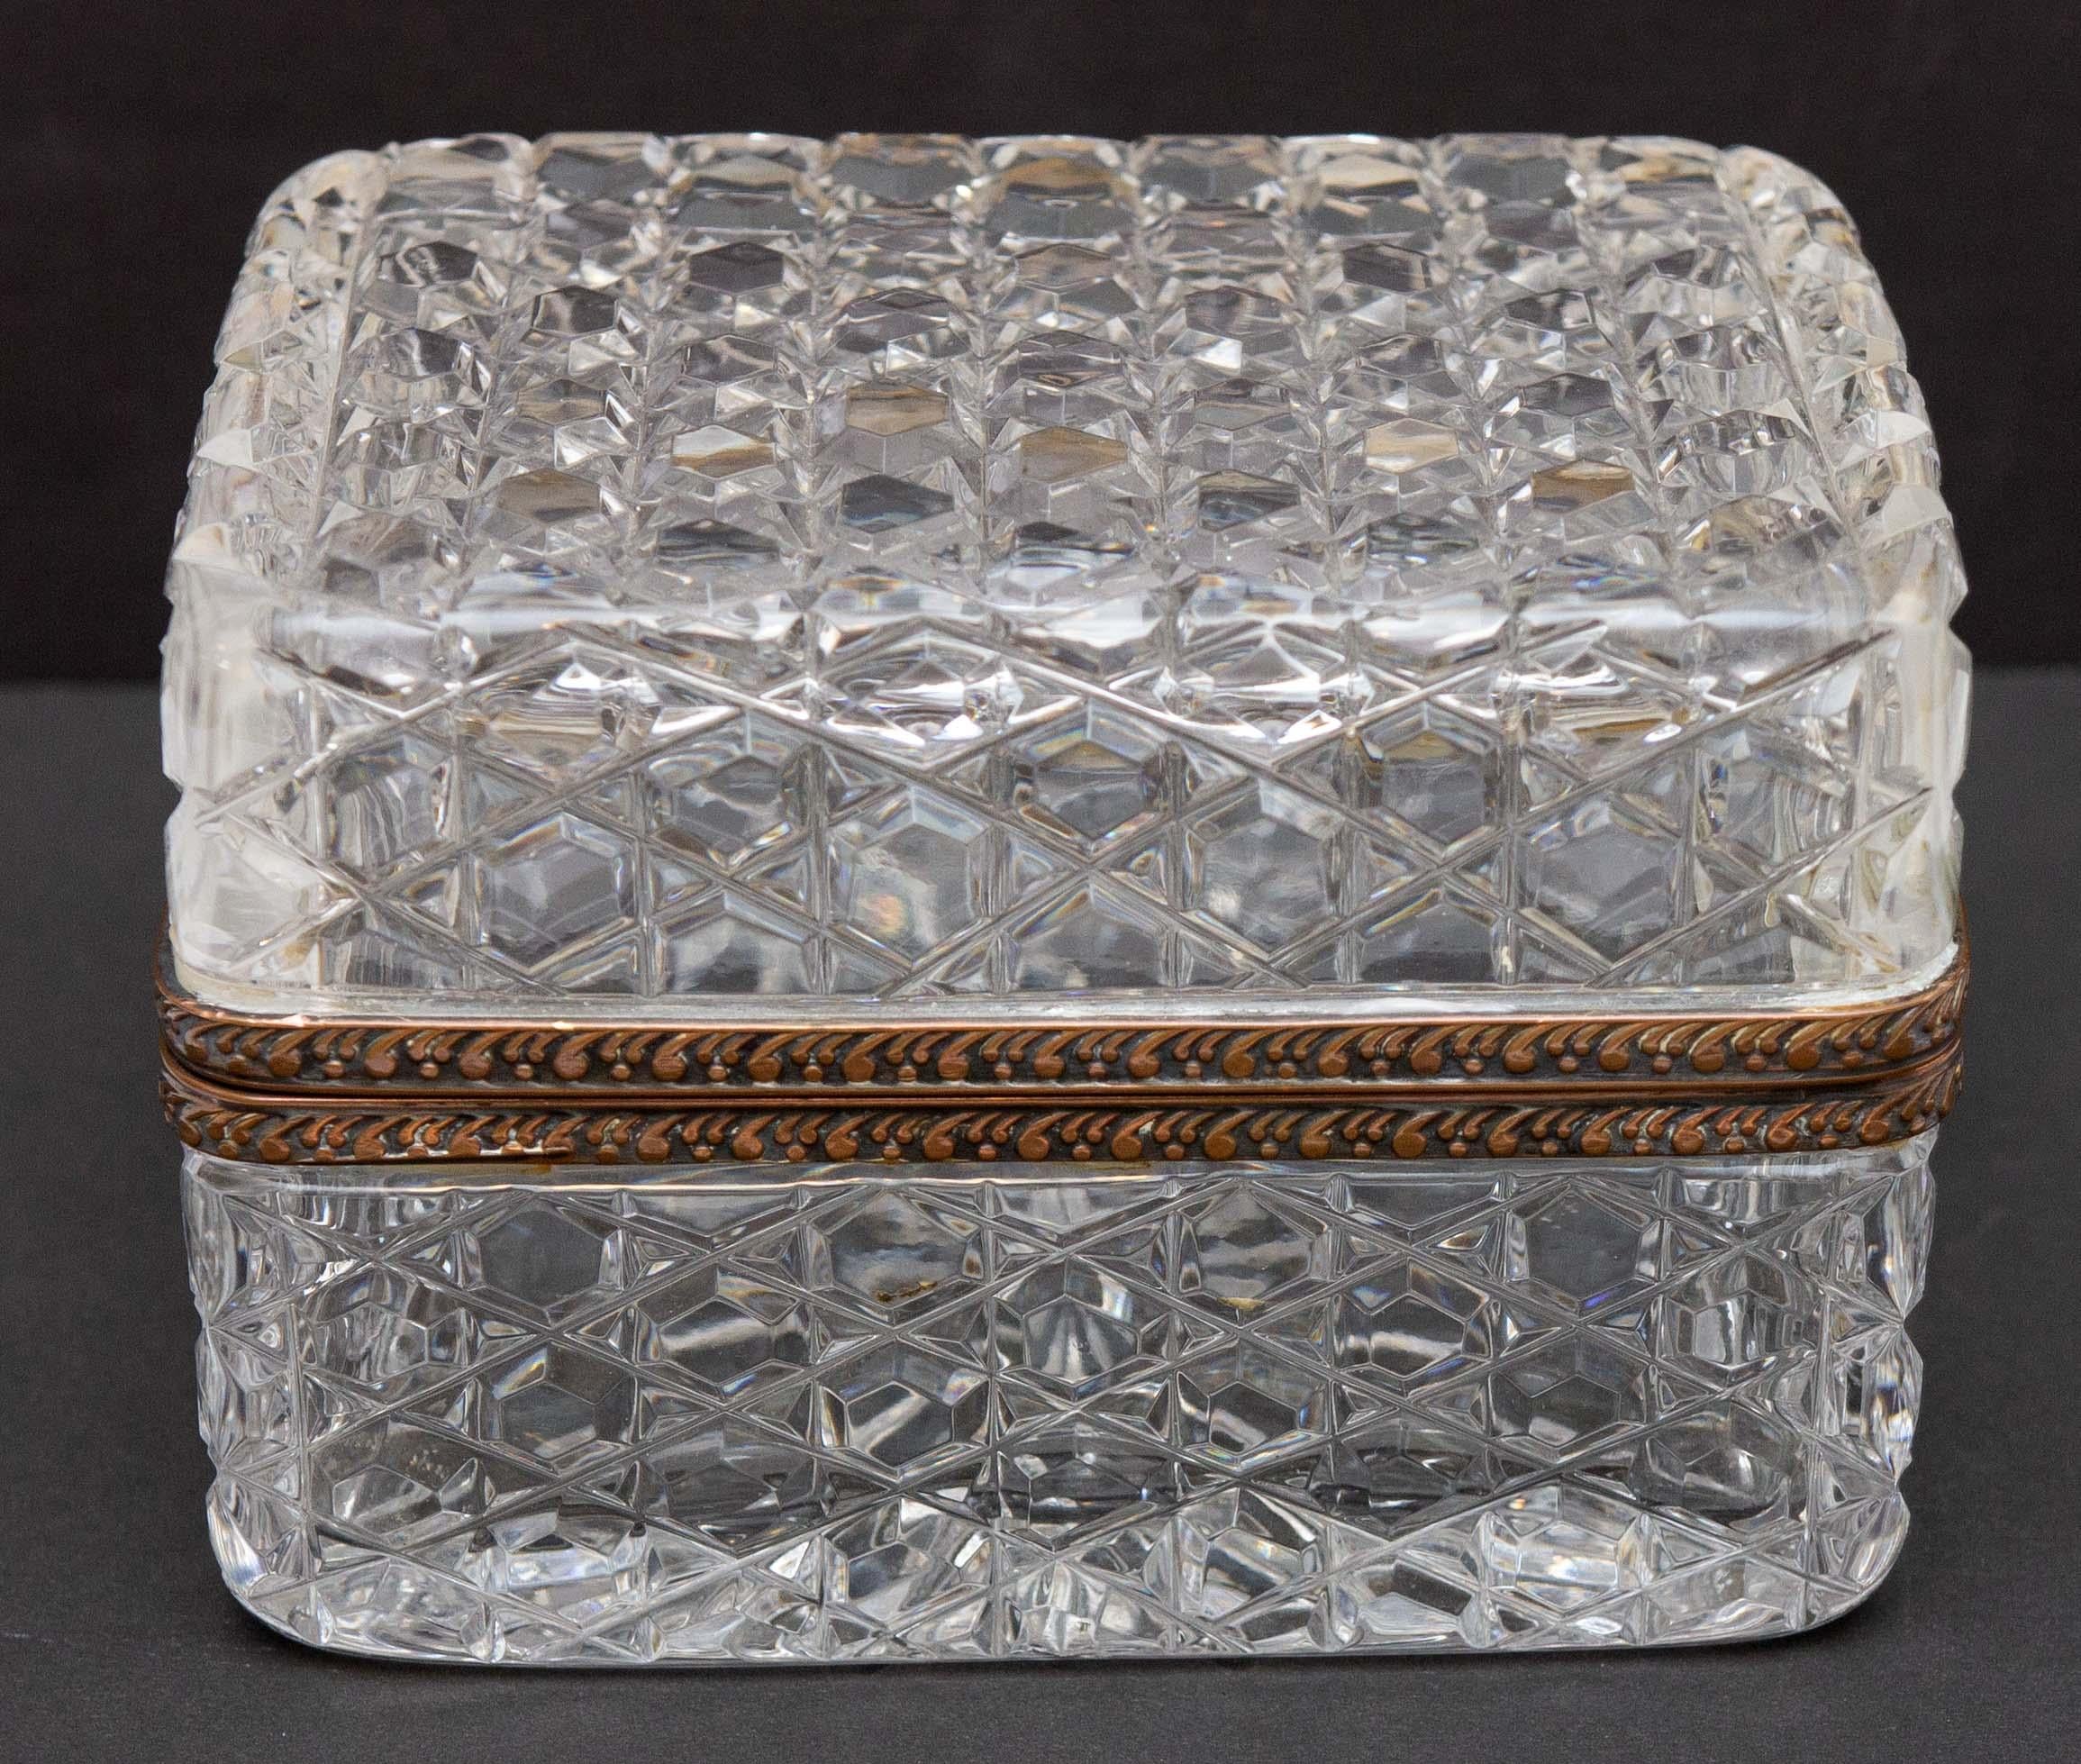 Antique glass and bronze box, early 20th century.